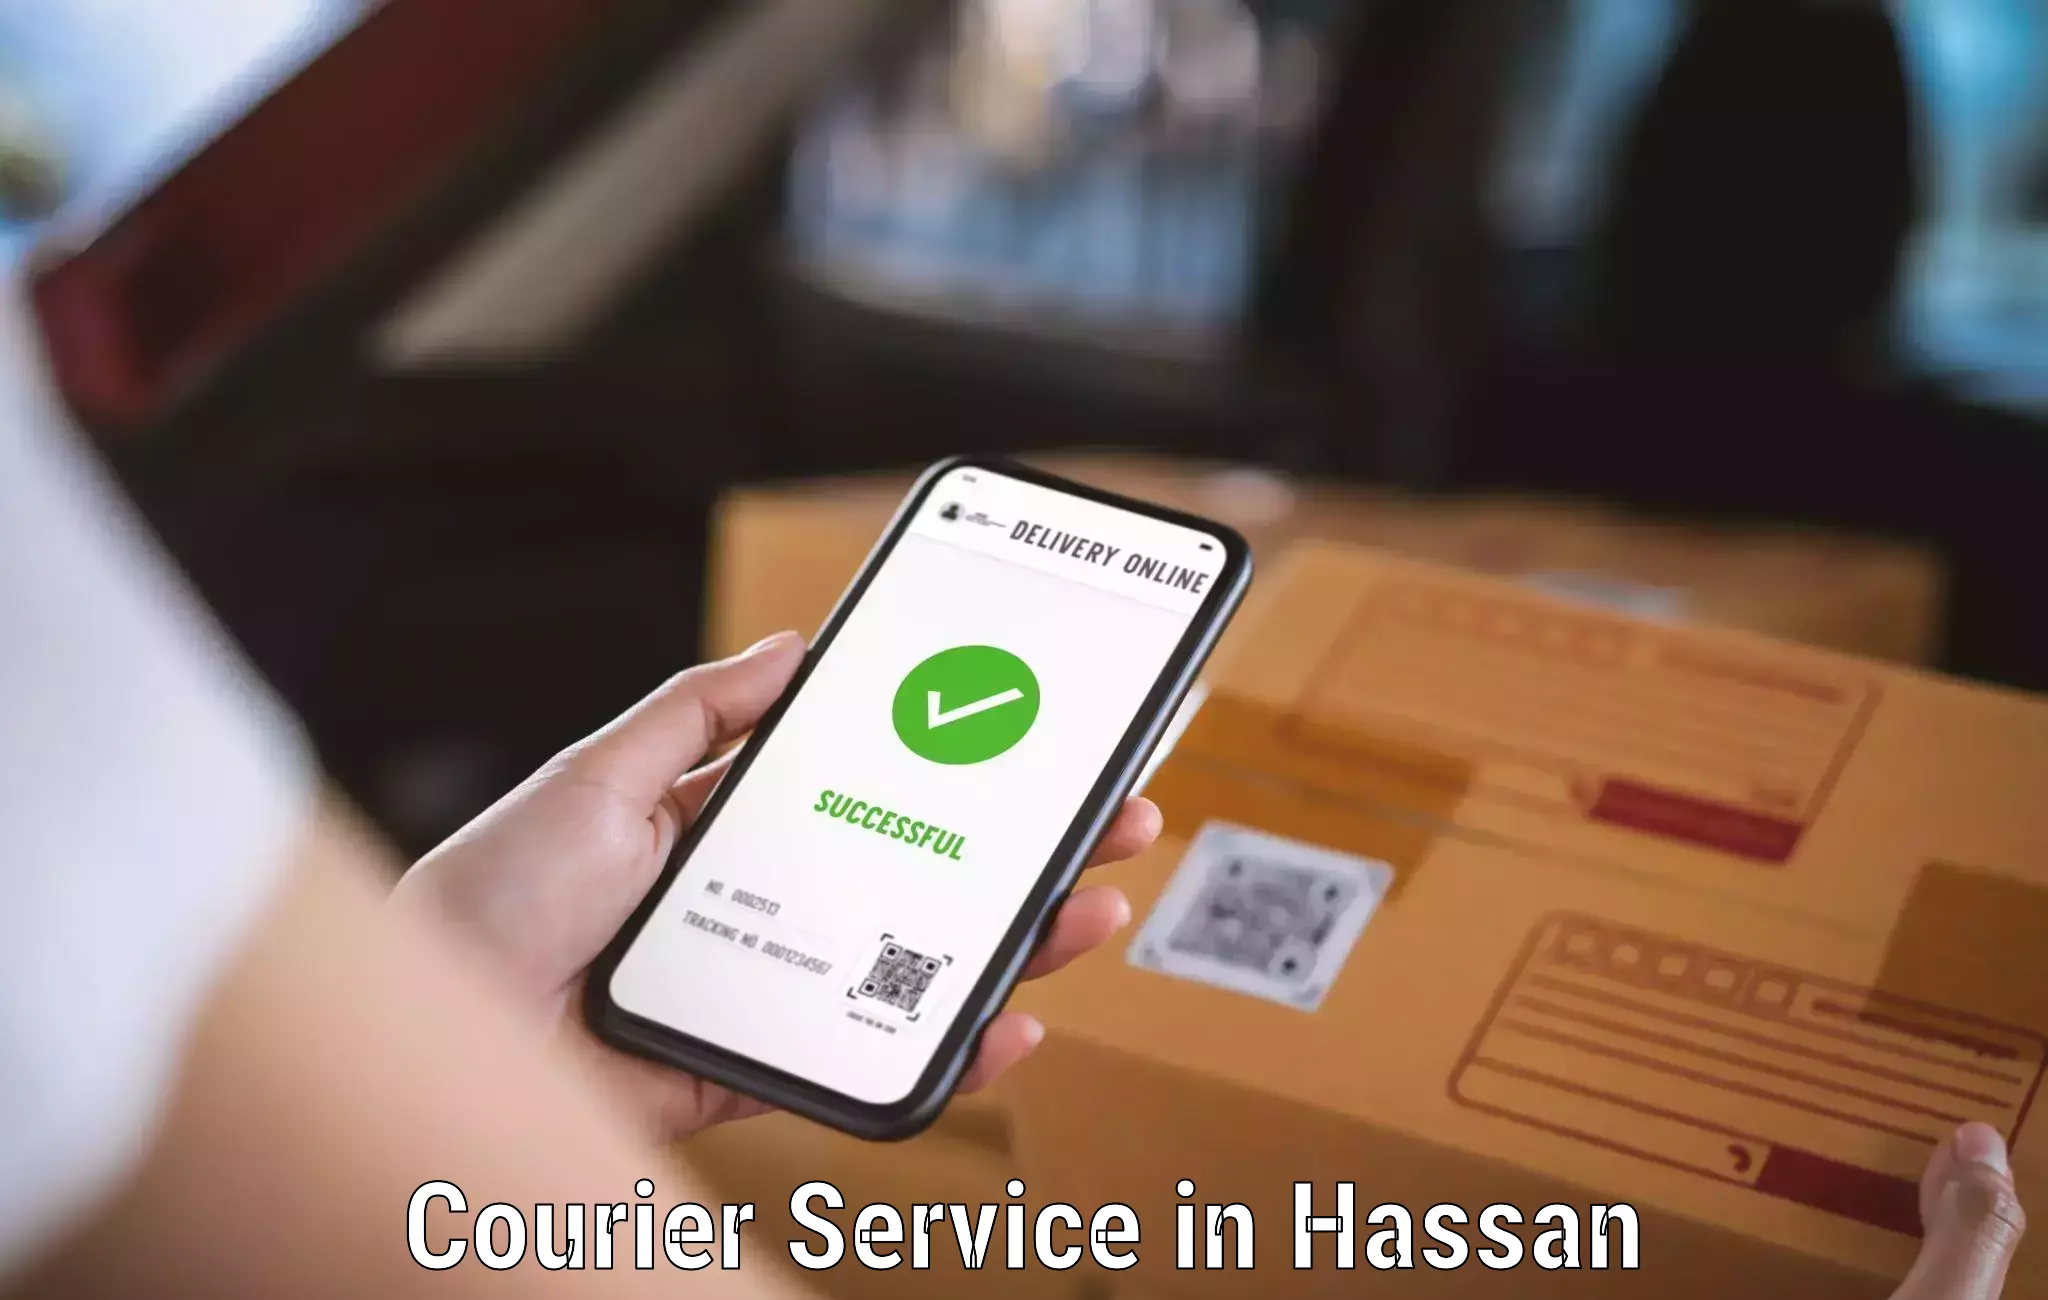 High-priority parcel service in Hassan